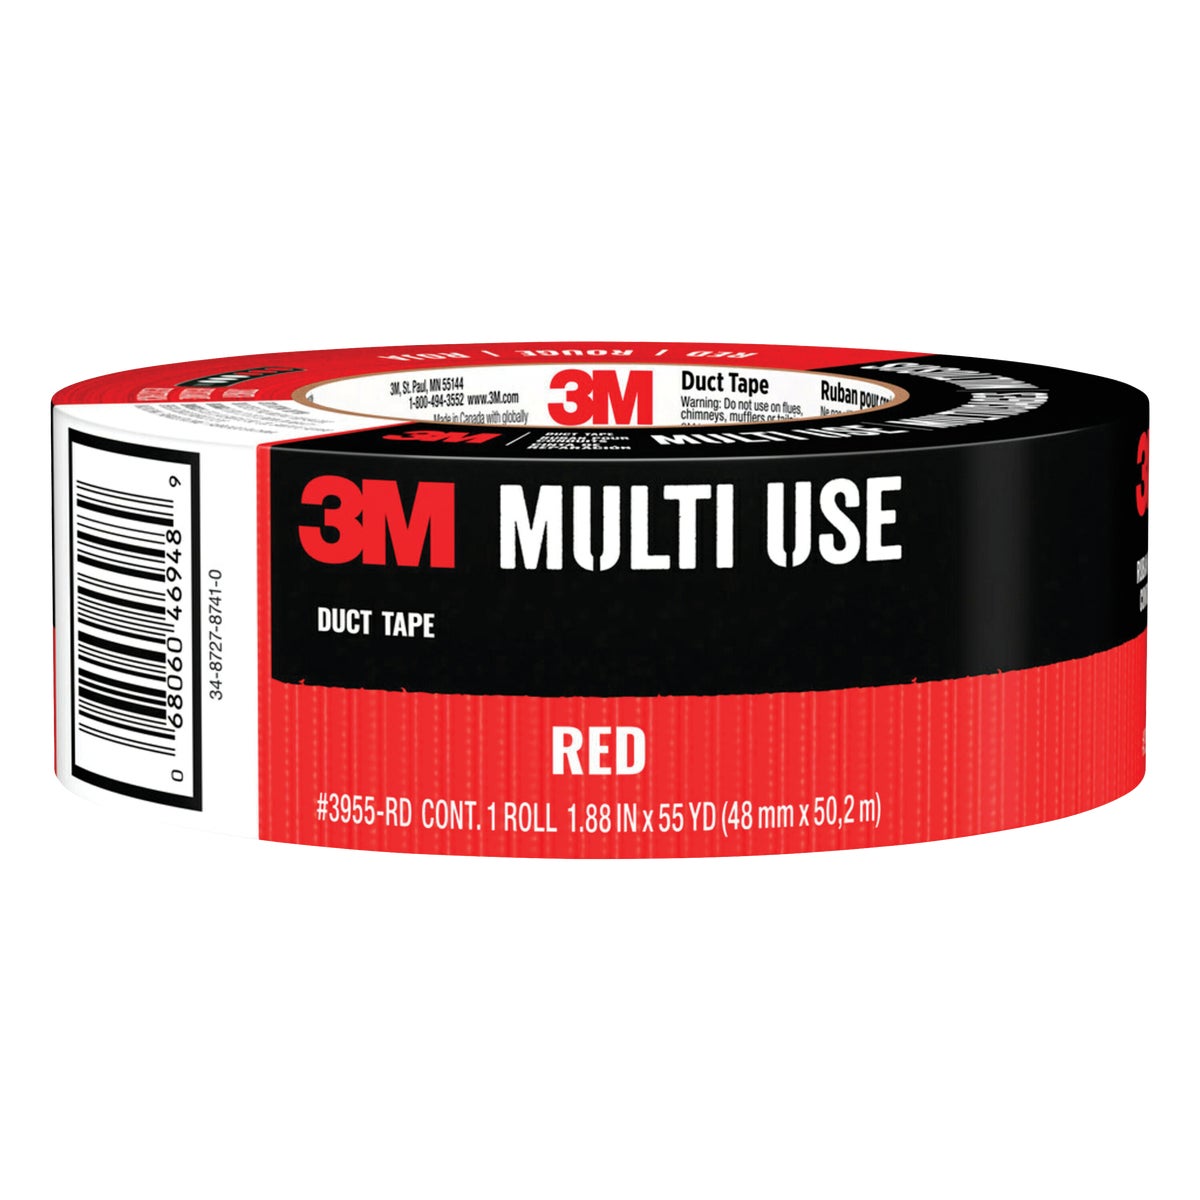 3M 1.88 In. x 60 Yd. Colored Duct Tape, Red